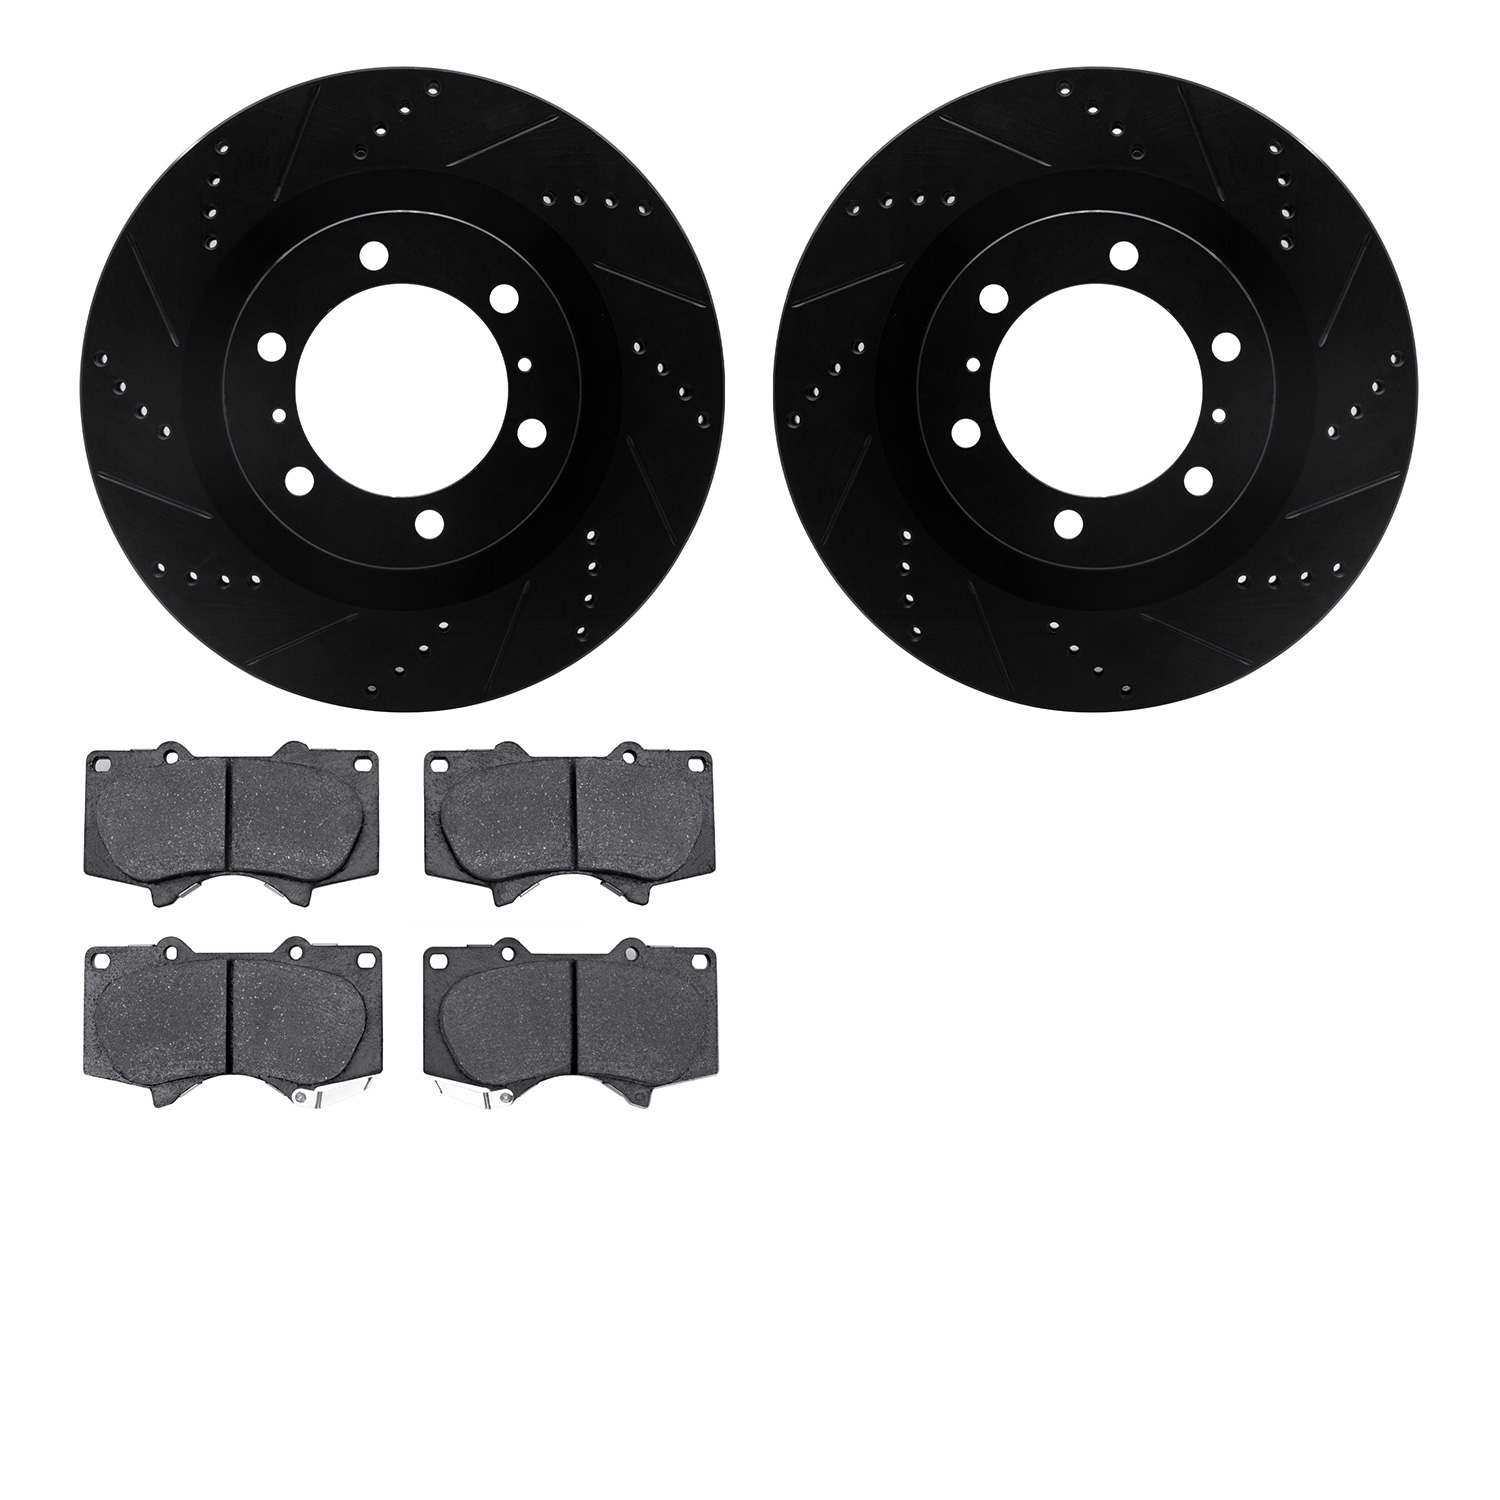 8402-76023 Drilled/Slotted Brake Rotors with Ultimate-Duty Brake Pads Kit [Black], Fits Select Lexus/Toyota/Scion, Position: Fro